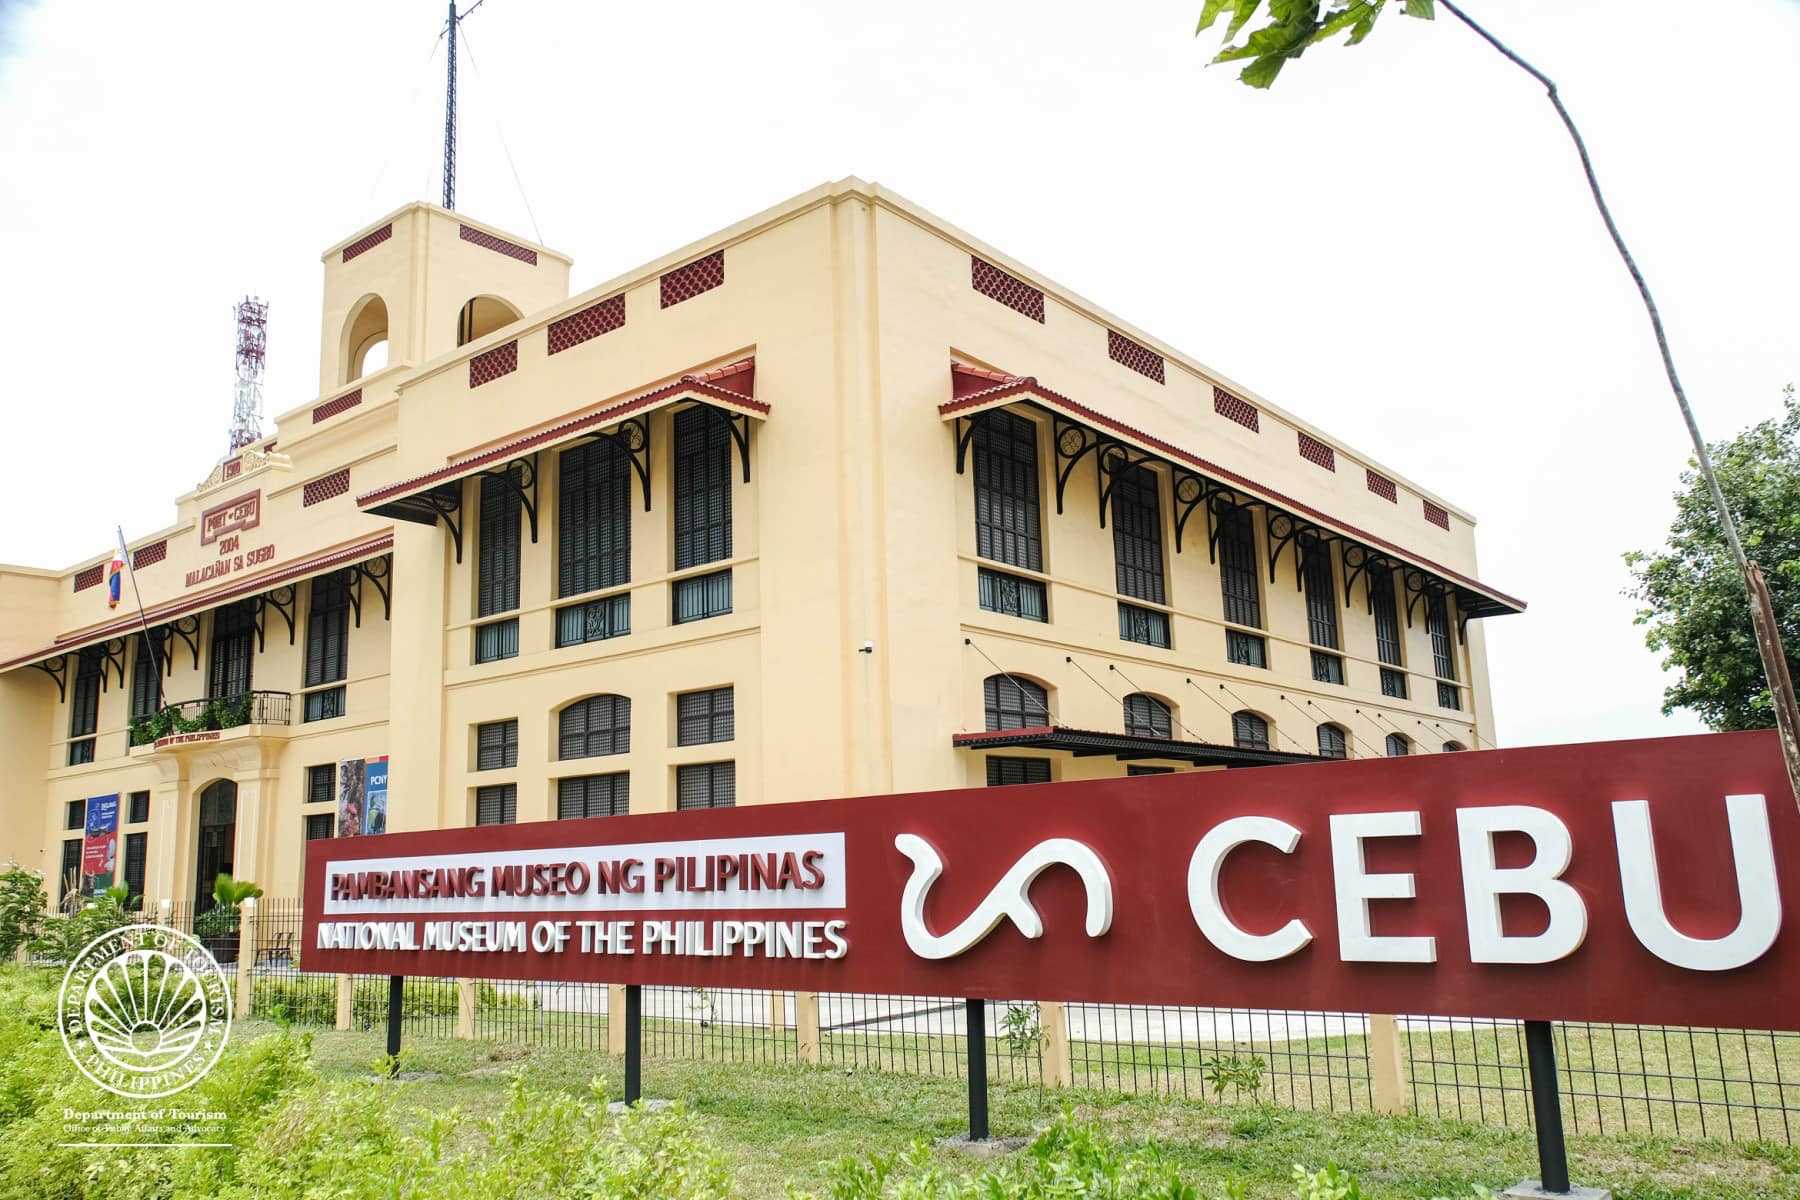 Cebu's first National Museum open its doors on August 1